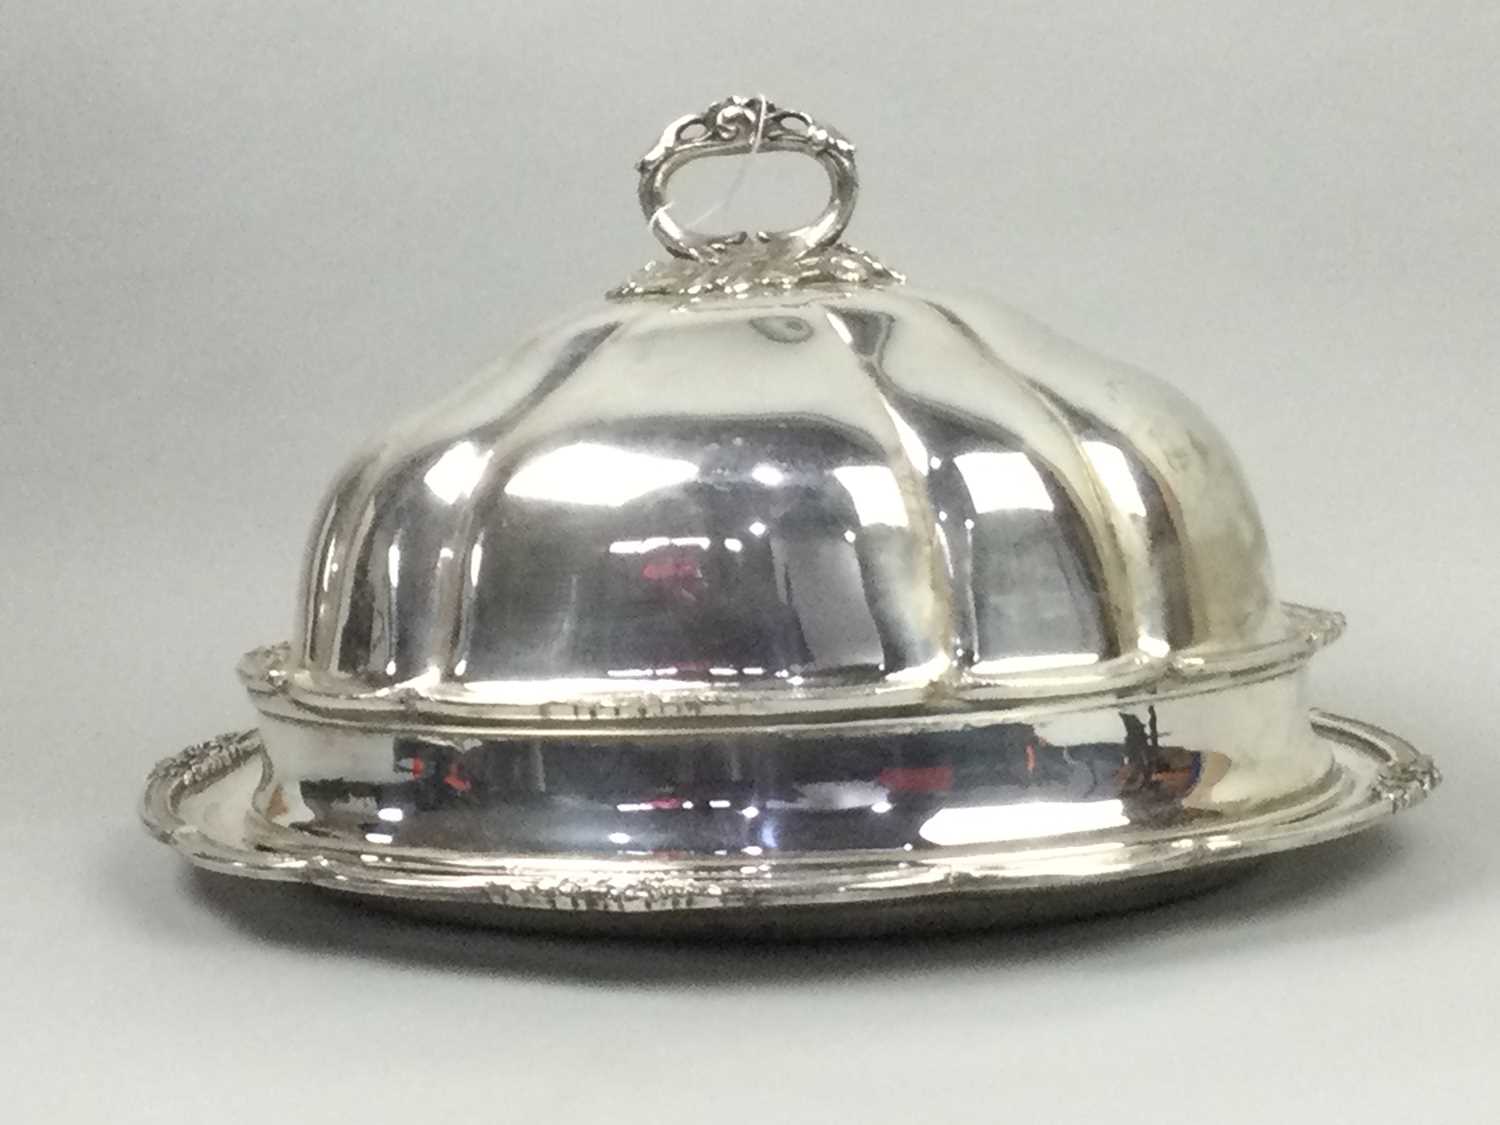 Lot 125 - A LATE 19TH/EARLY 20TH CENTURY SILVER PLATED MEAT DISH AND COVER